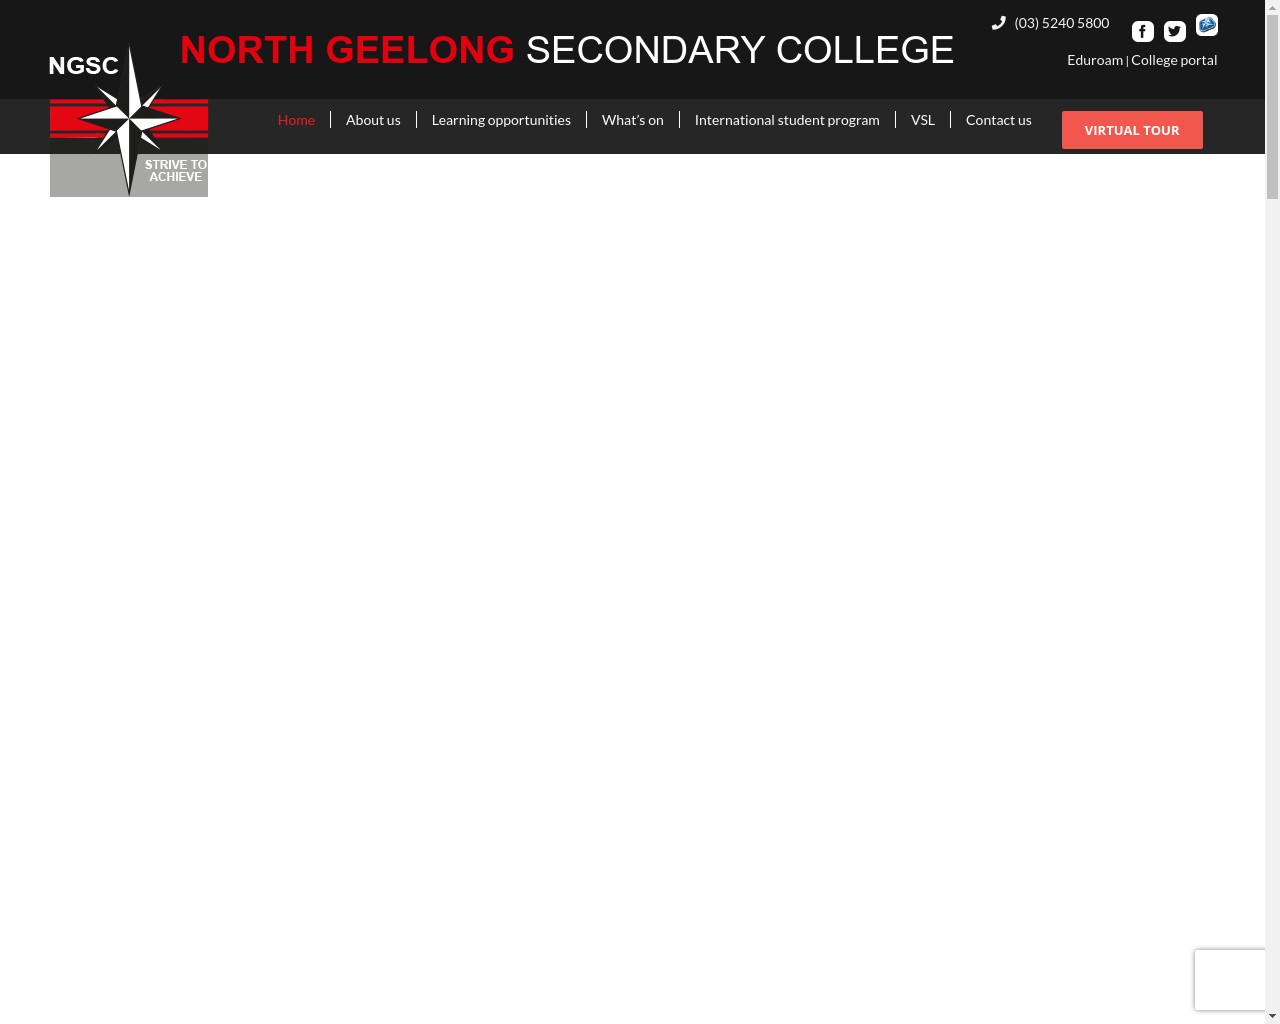 North Geelong Secondary College